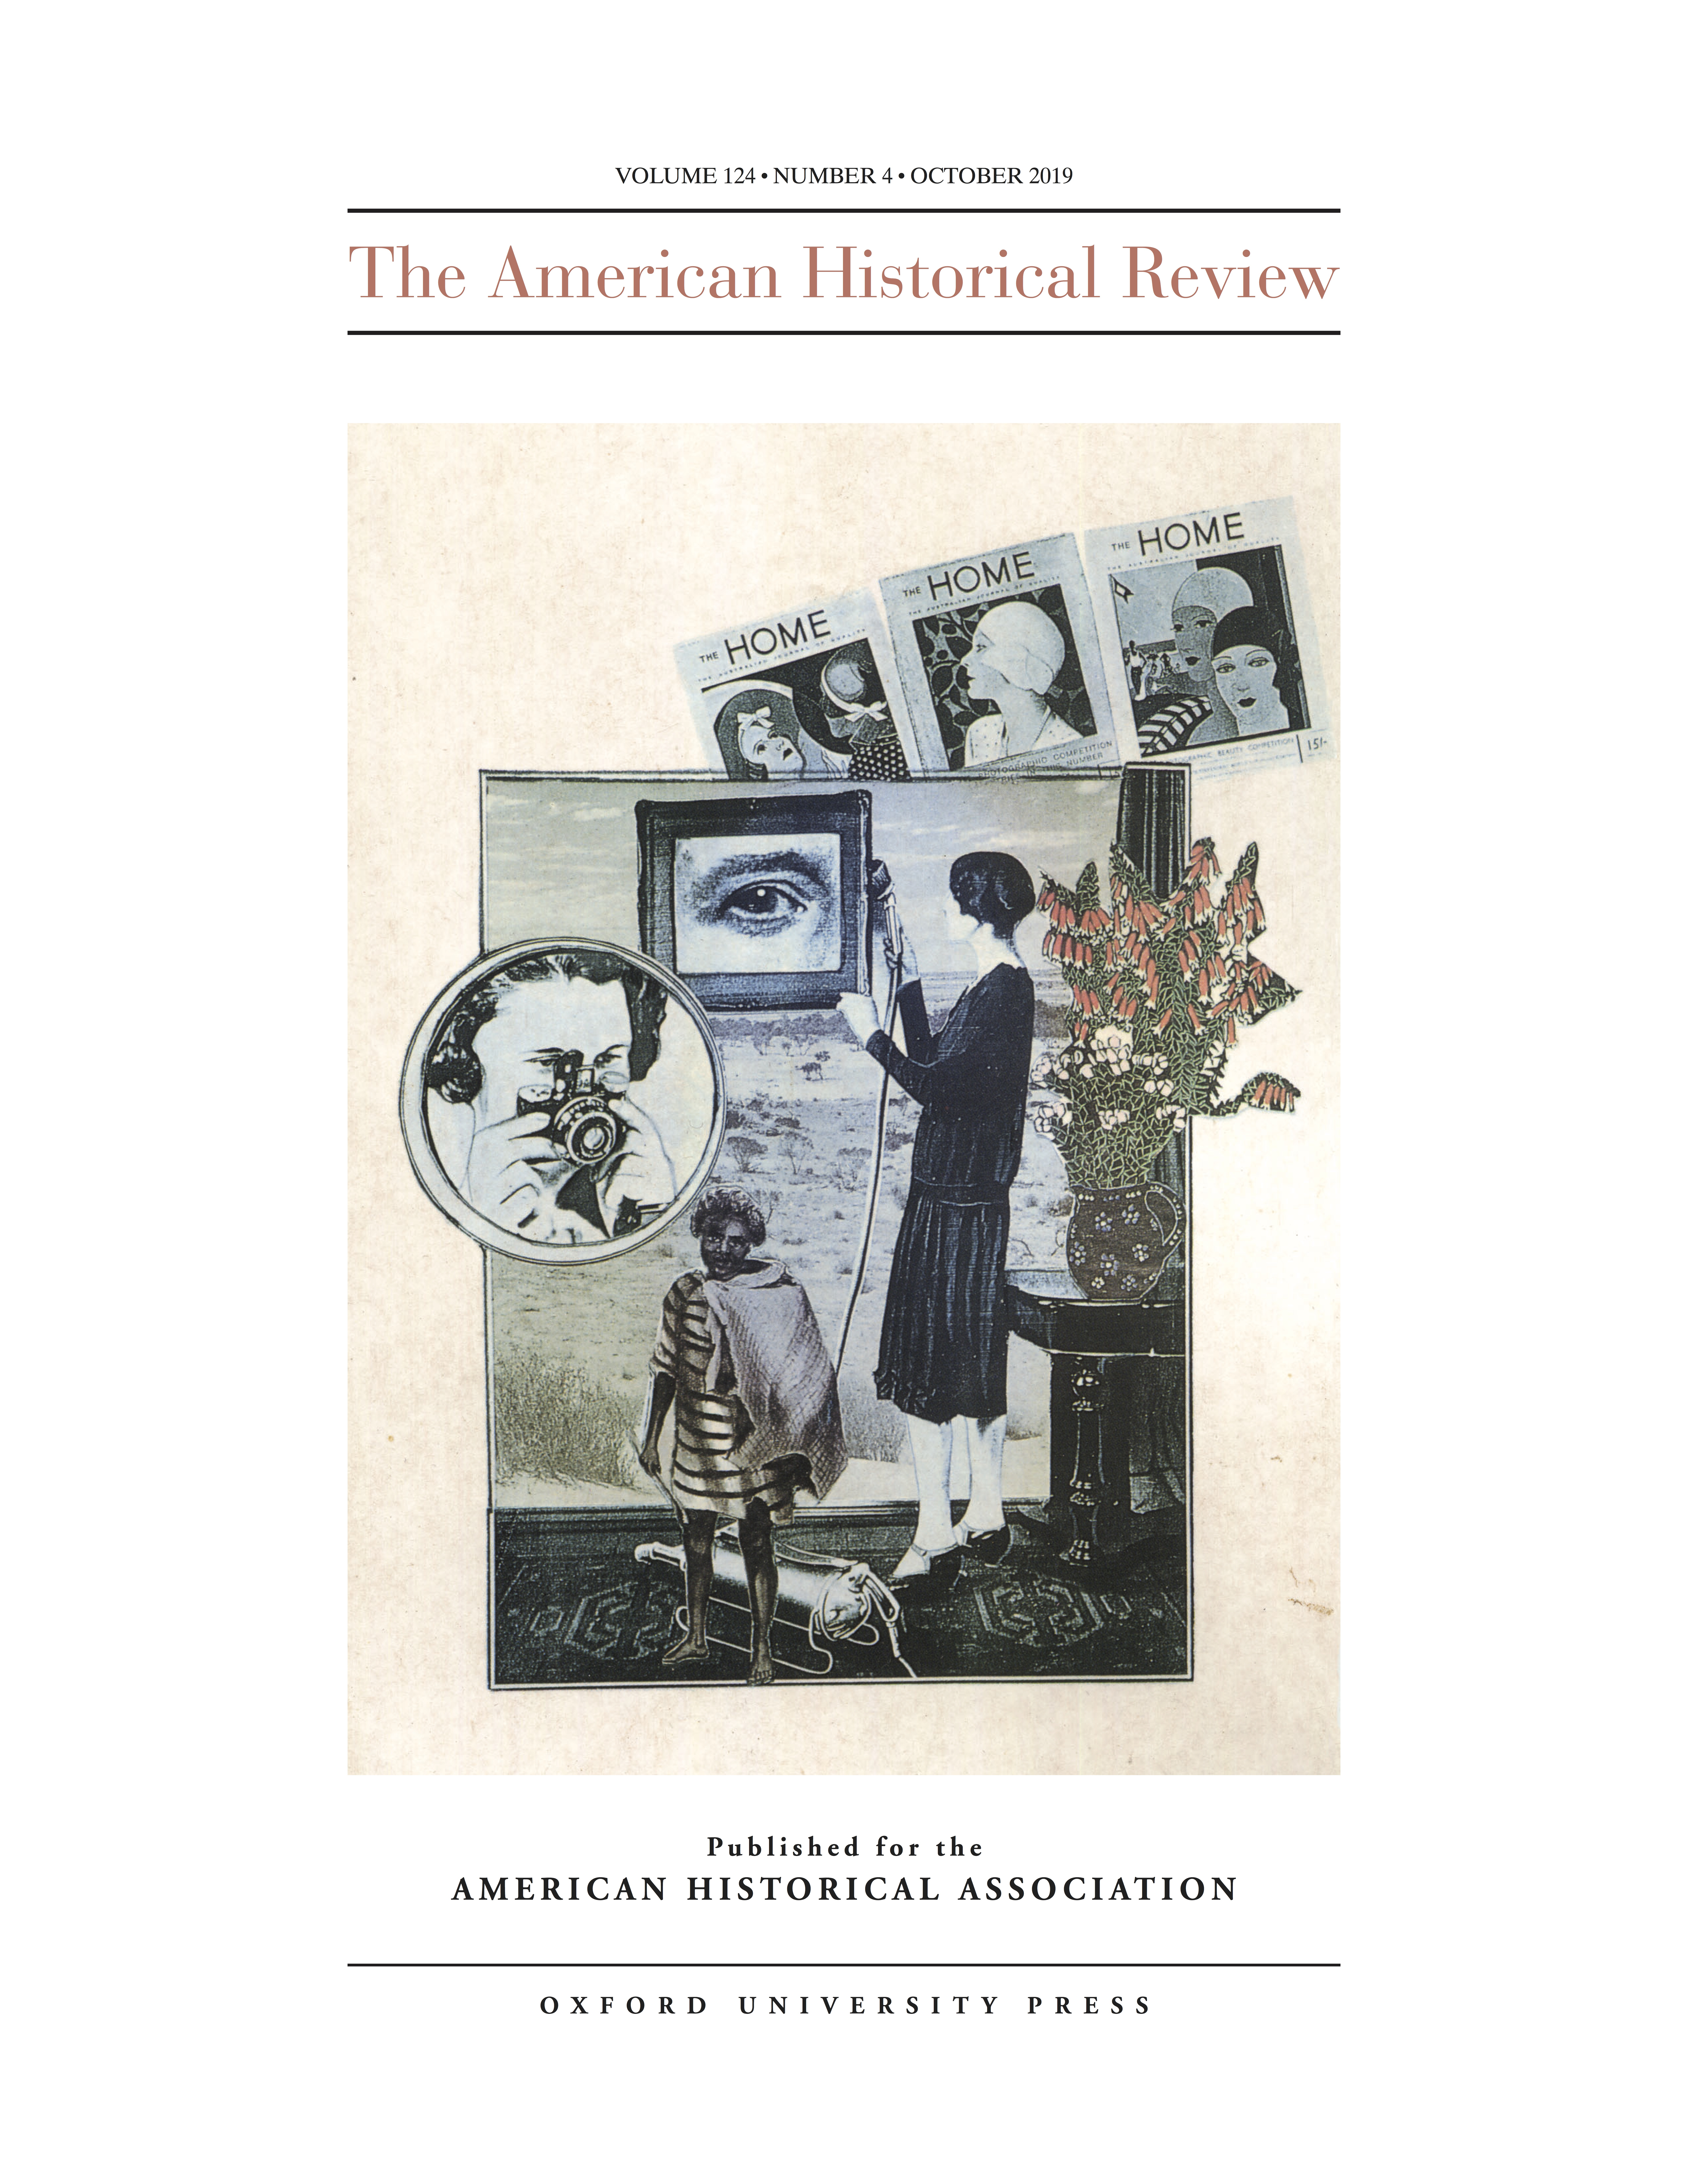 Cover of the October 2019 American Historical Review